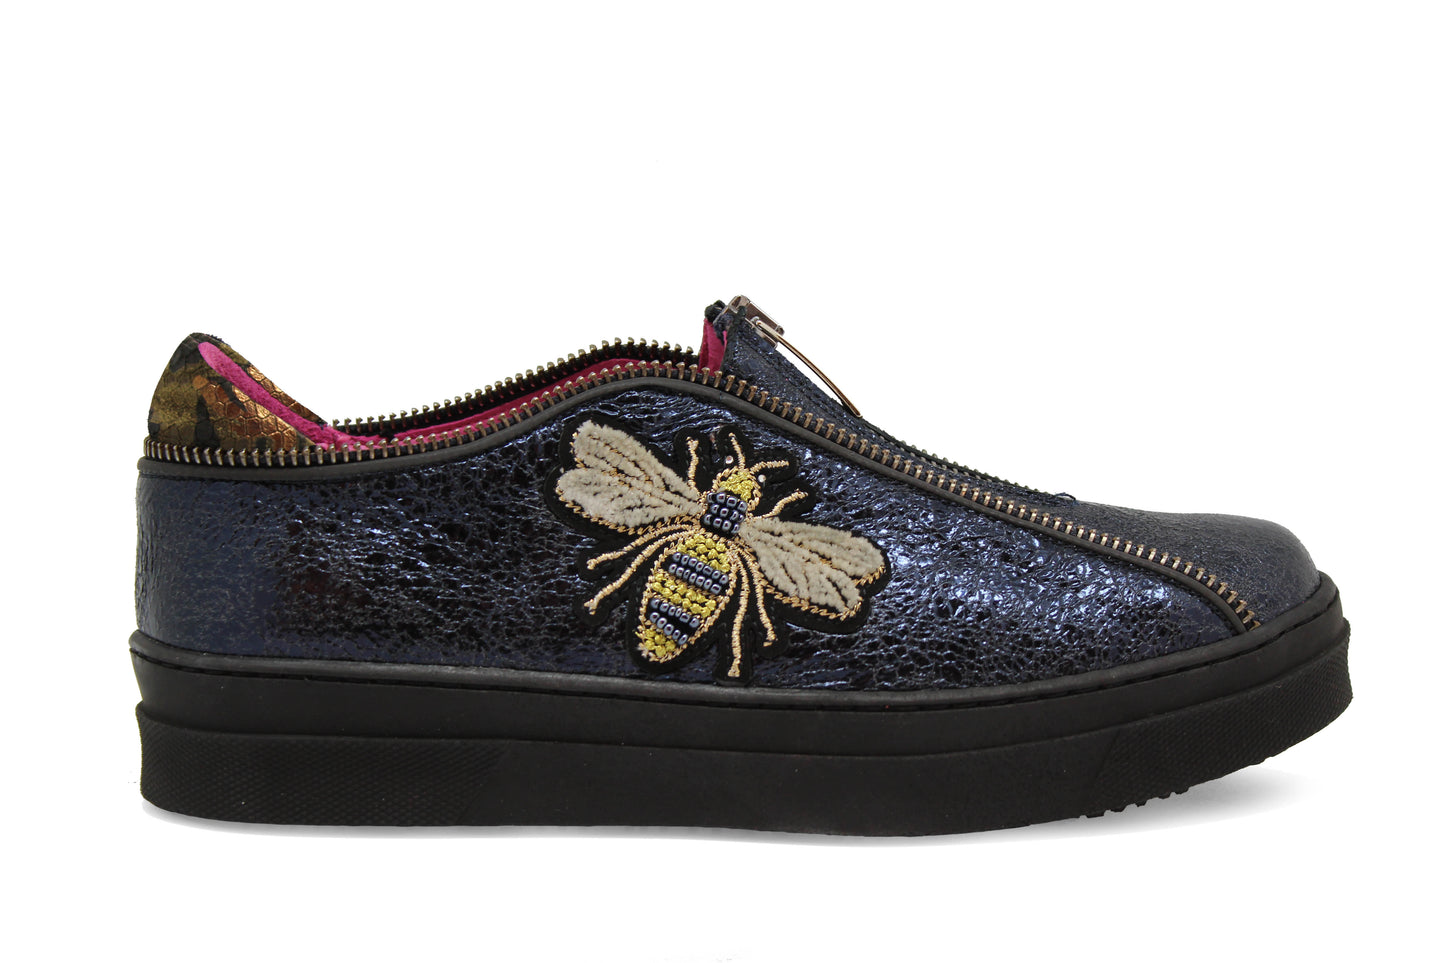 Royal Blue Bespoke footwear with a wasp design in the UK.